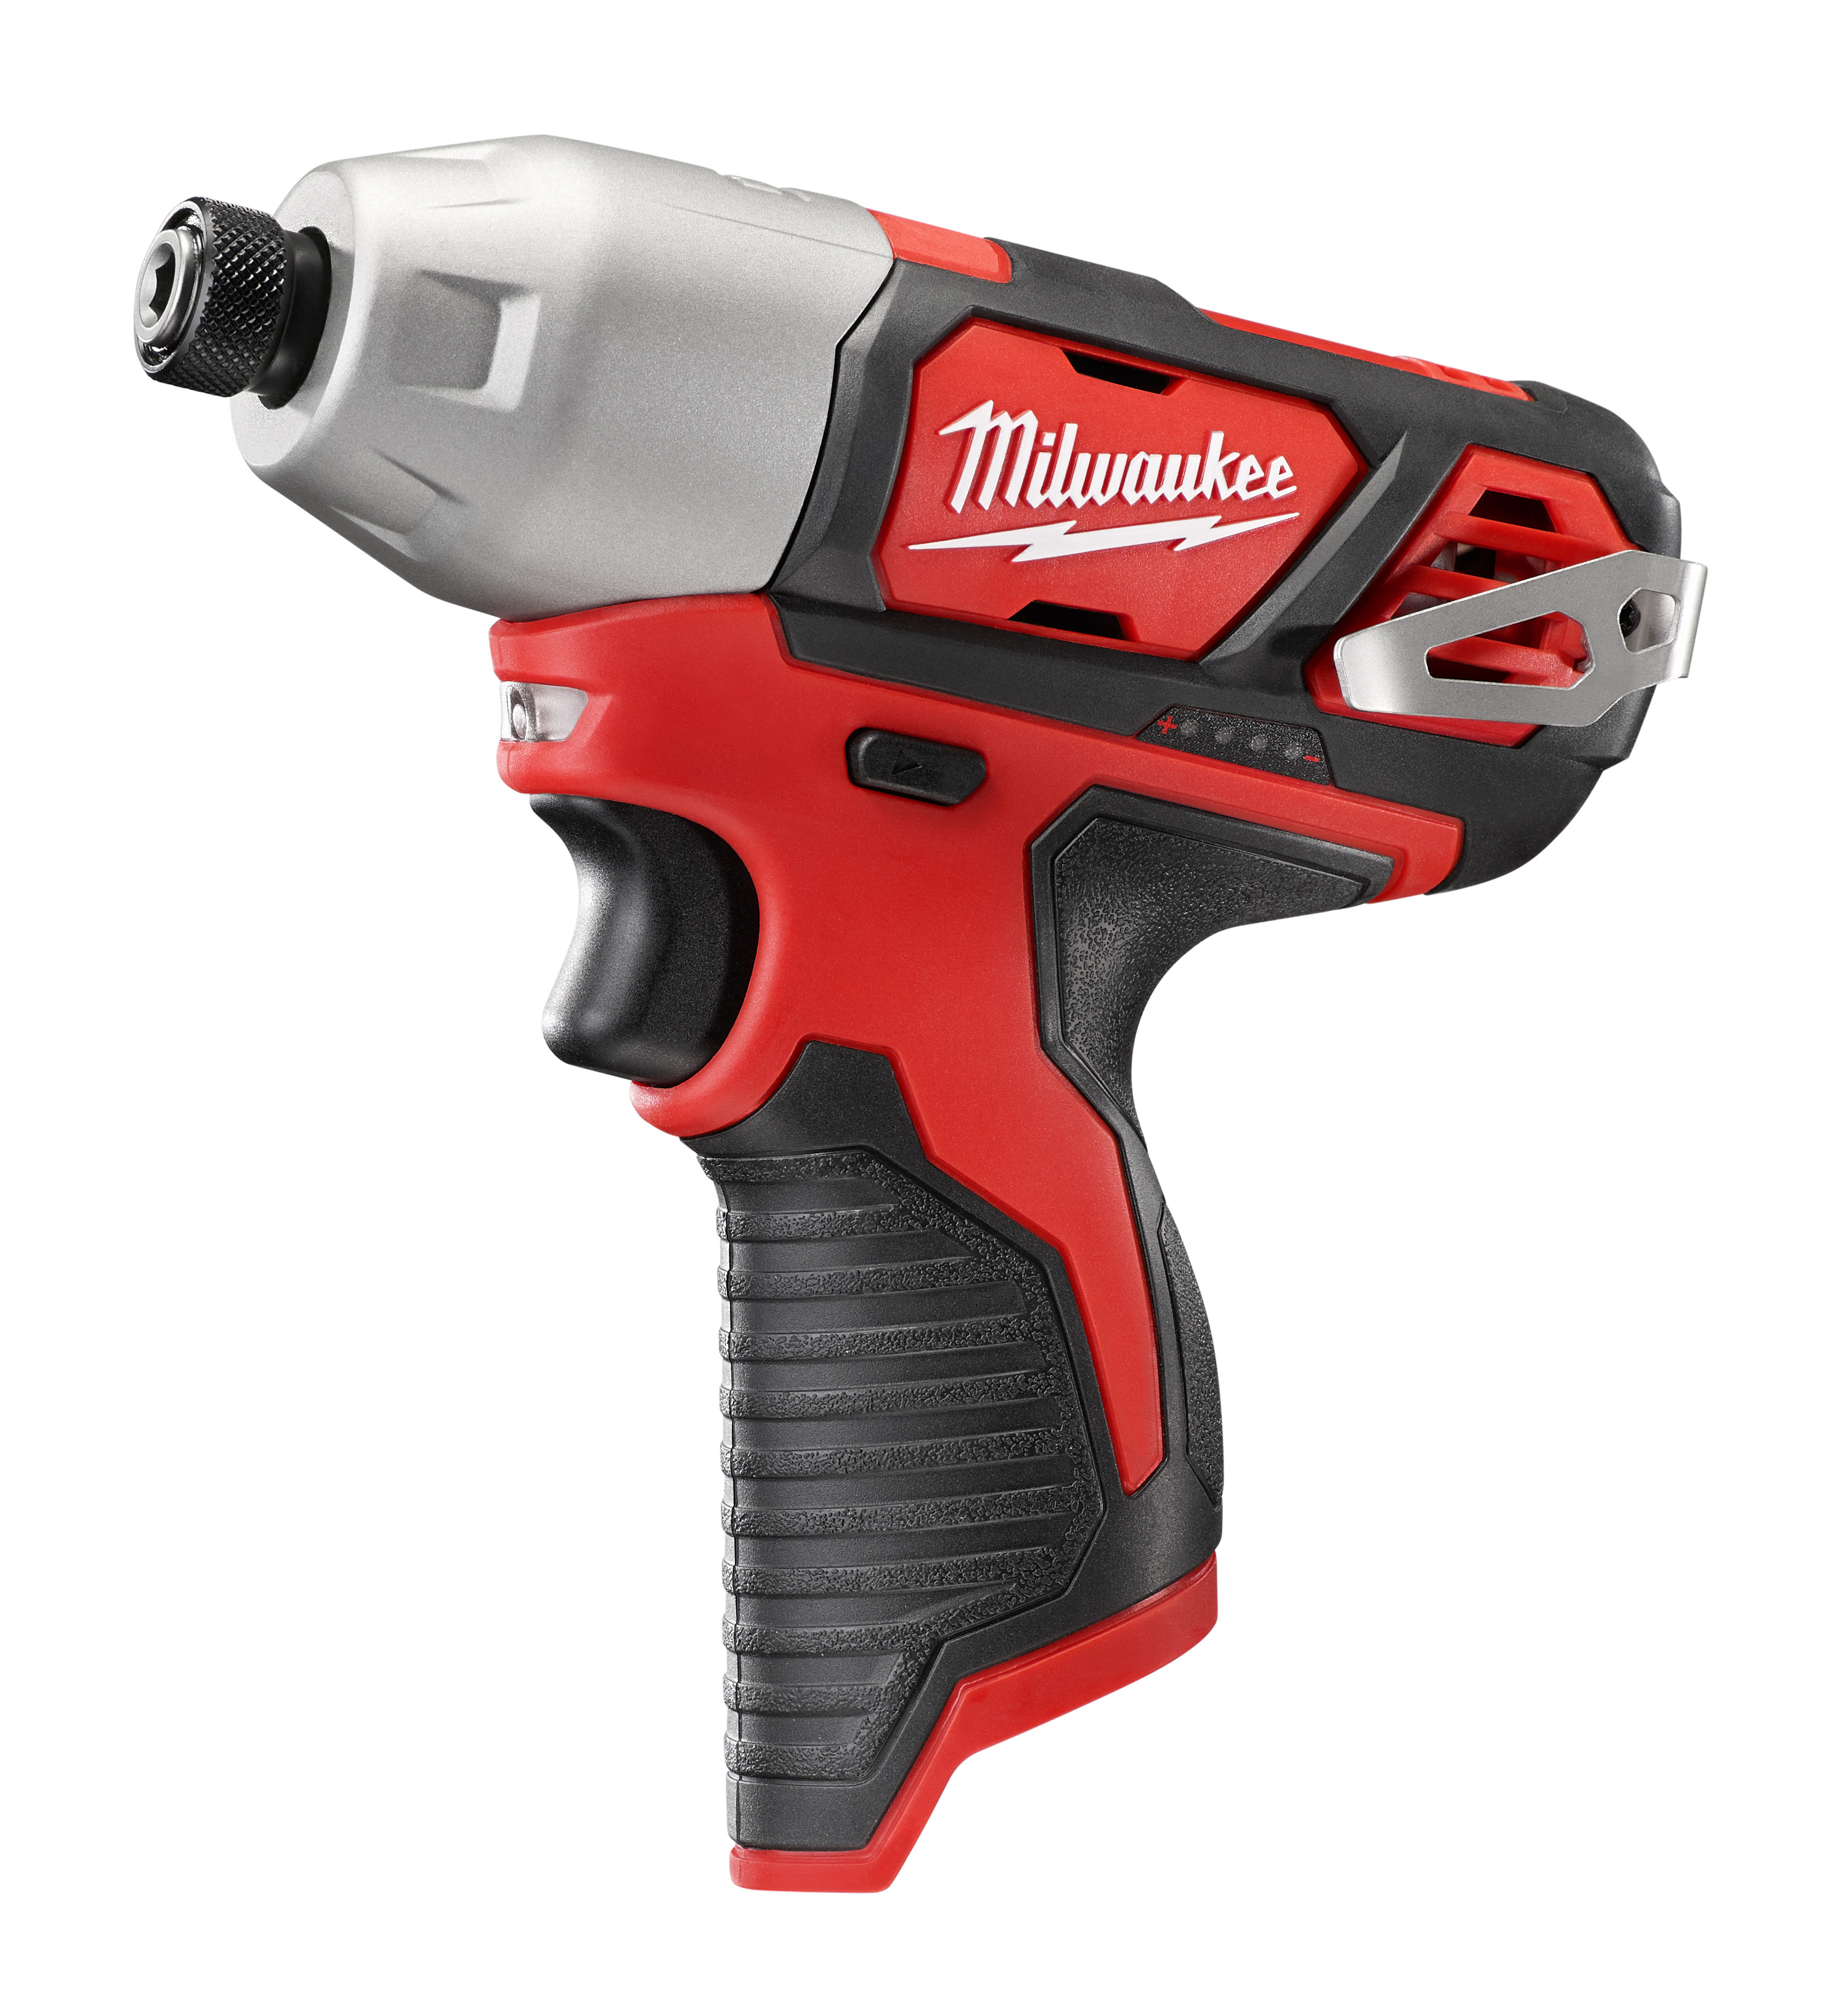 Milwaukee® M12™ FUEL™ 2454-20 Compact Cordless Impact Wrench, 3/8 in Straight Drive, 2650/3500 bpm, 117 ft-lb Torque, 12 VDC, 6-1/2 in OAL